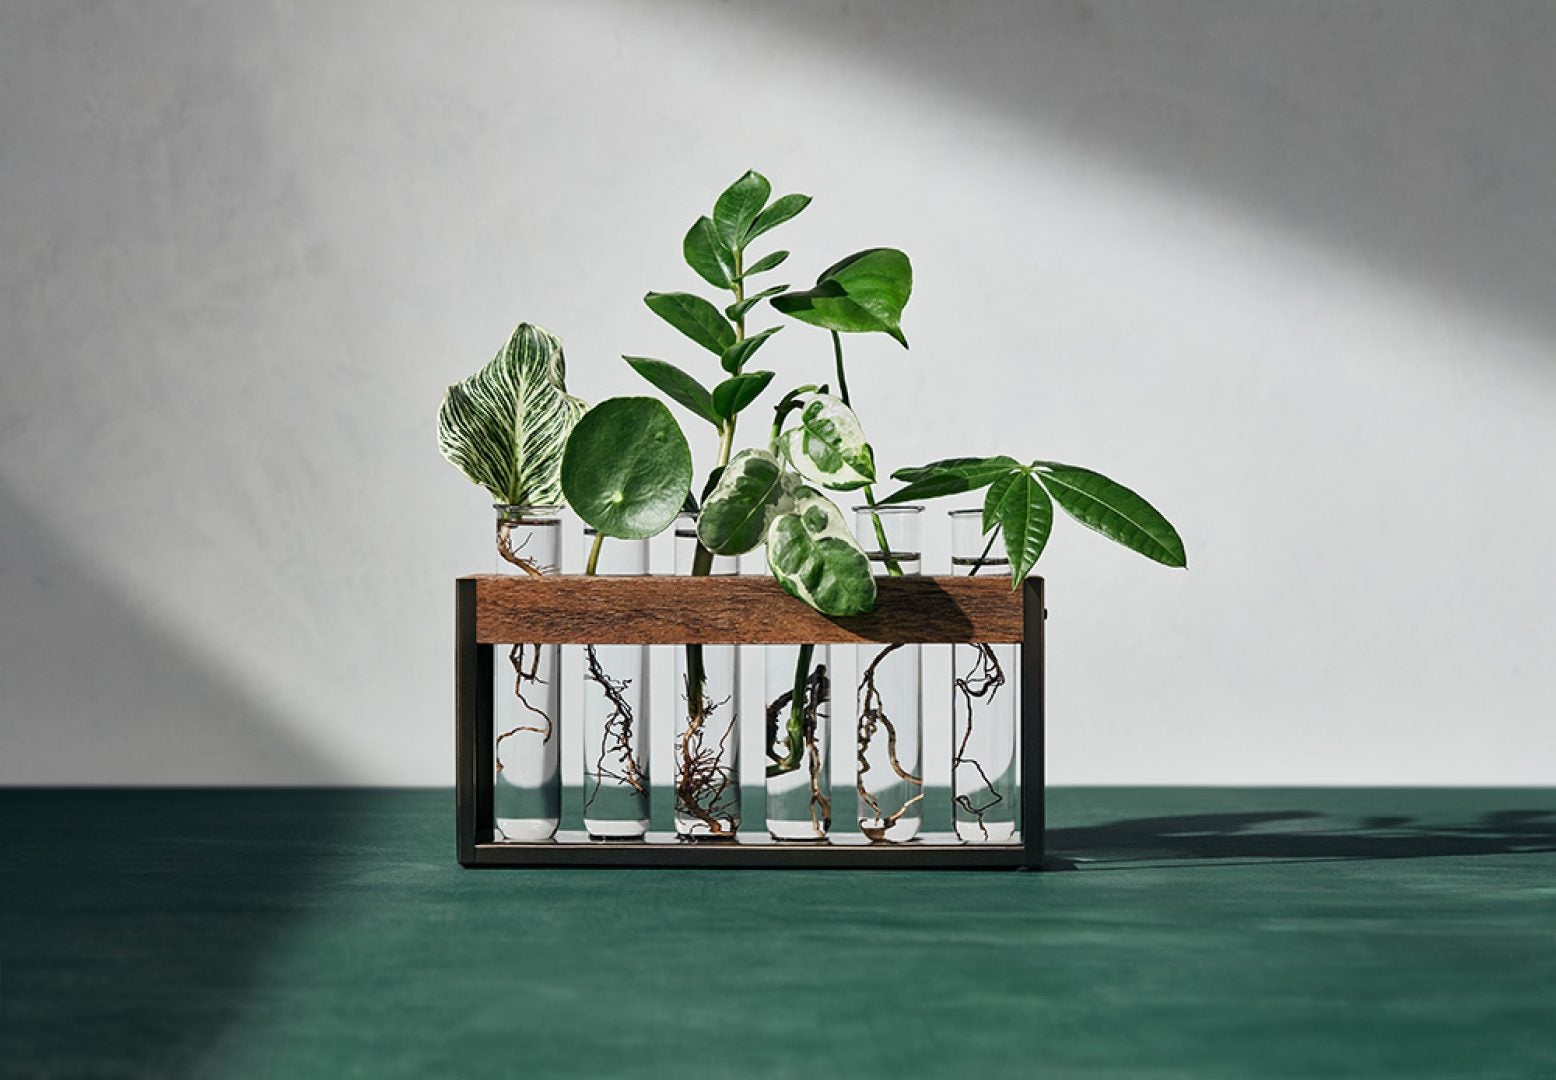 First Look: Plant Enthusiast Hilton Carter's New Target Designer Collection Will Make Your Spring